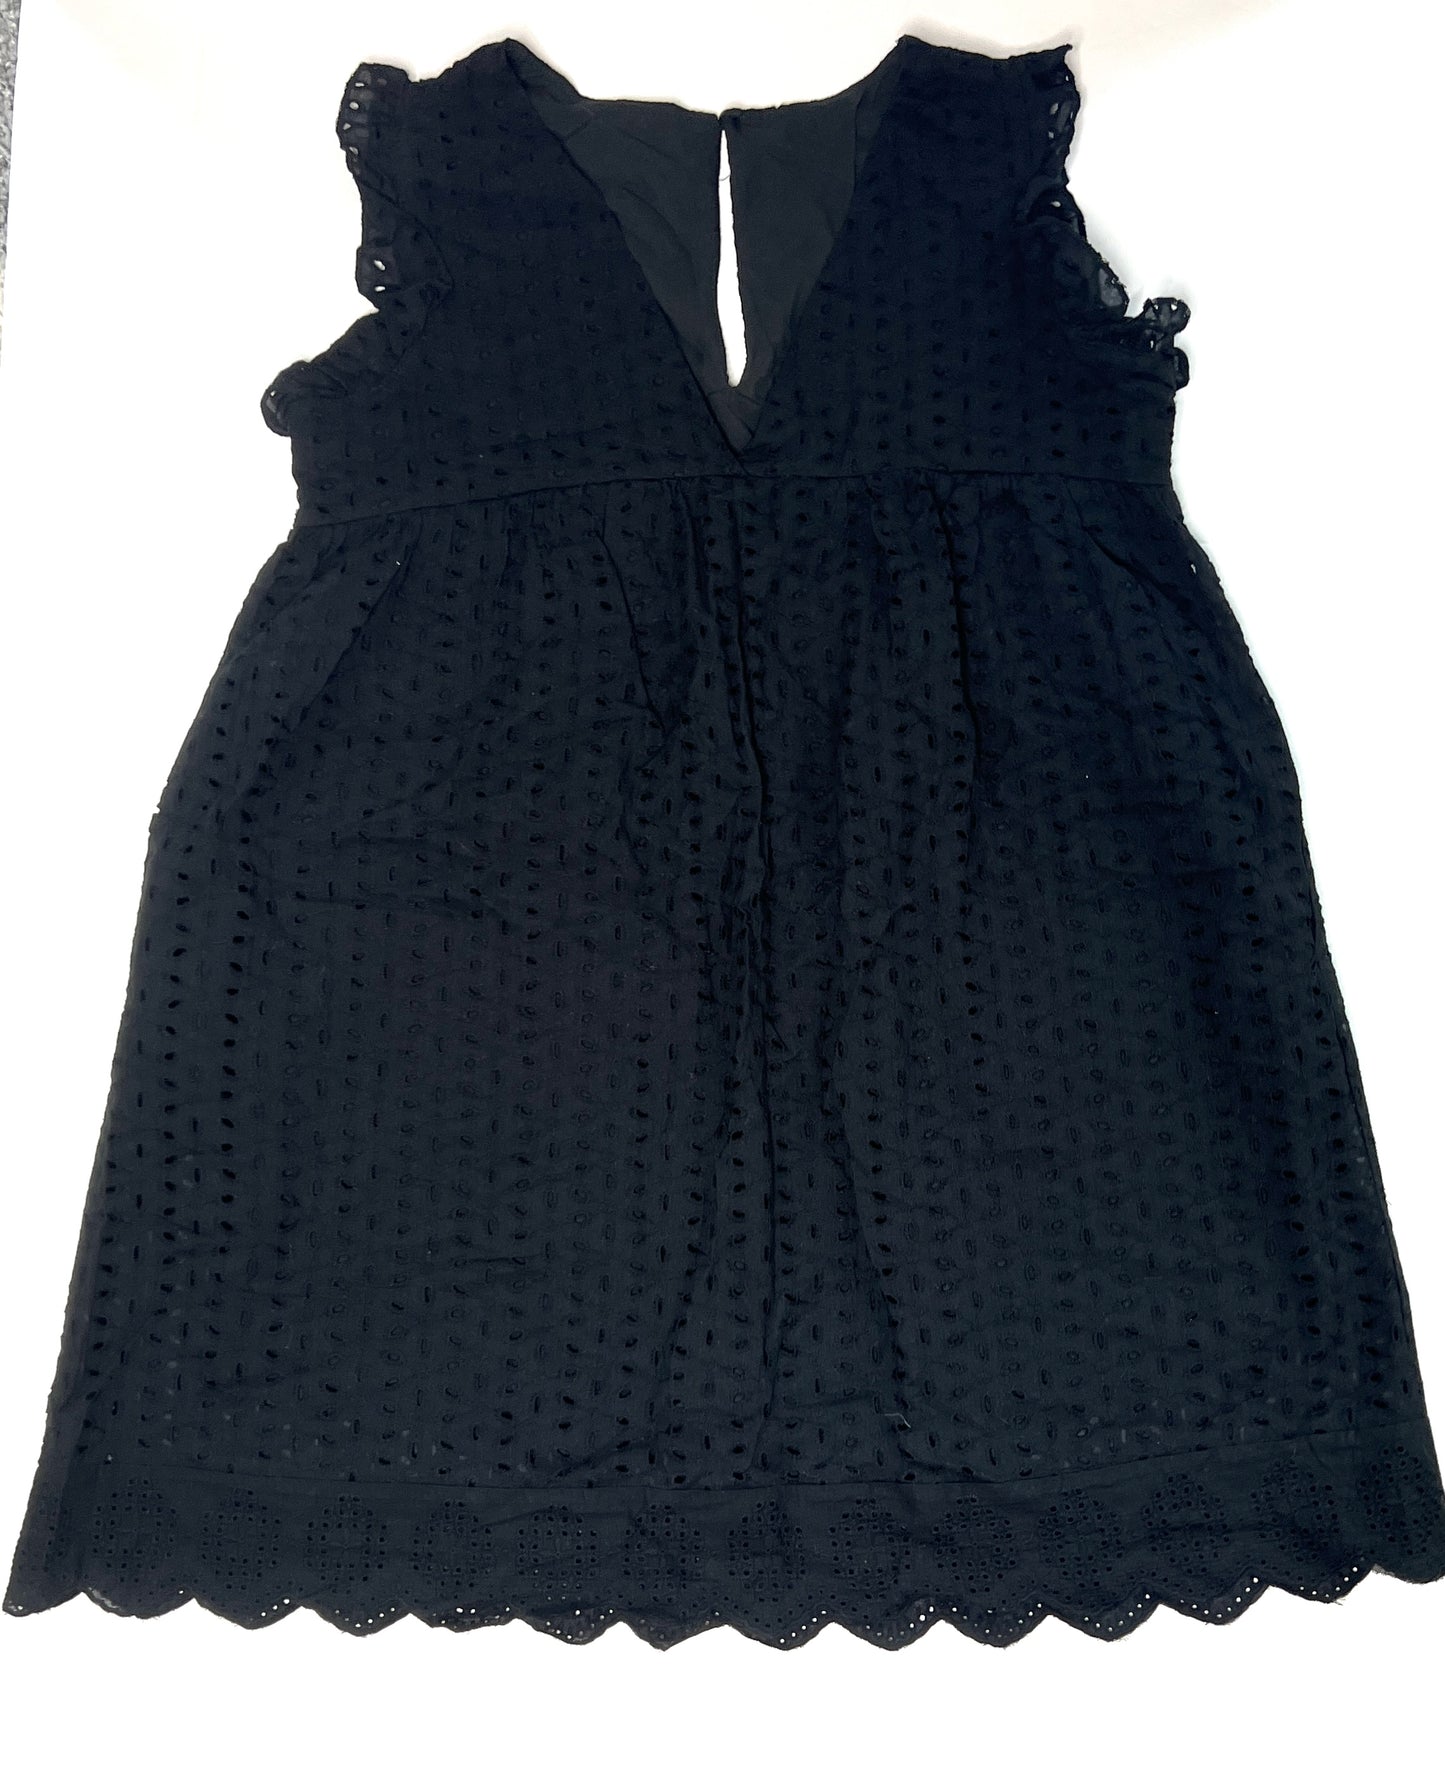 Womens black eyelet dress with built in shorts no tag, fits like a S/M